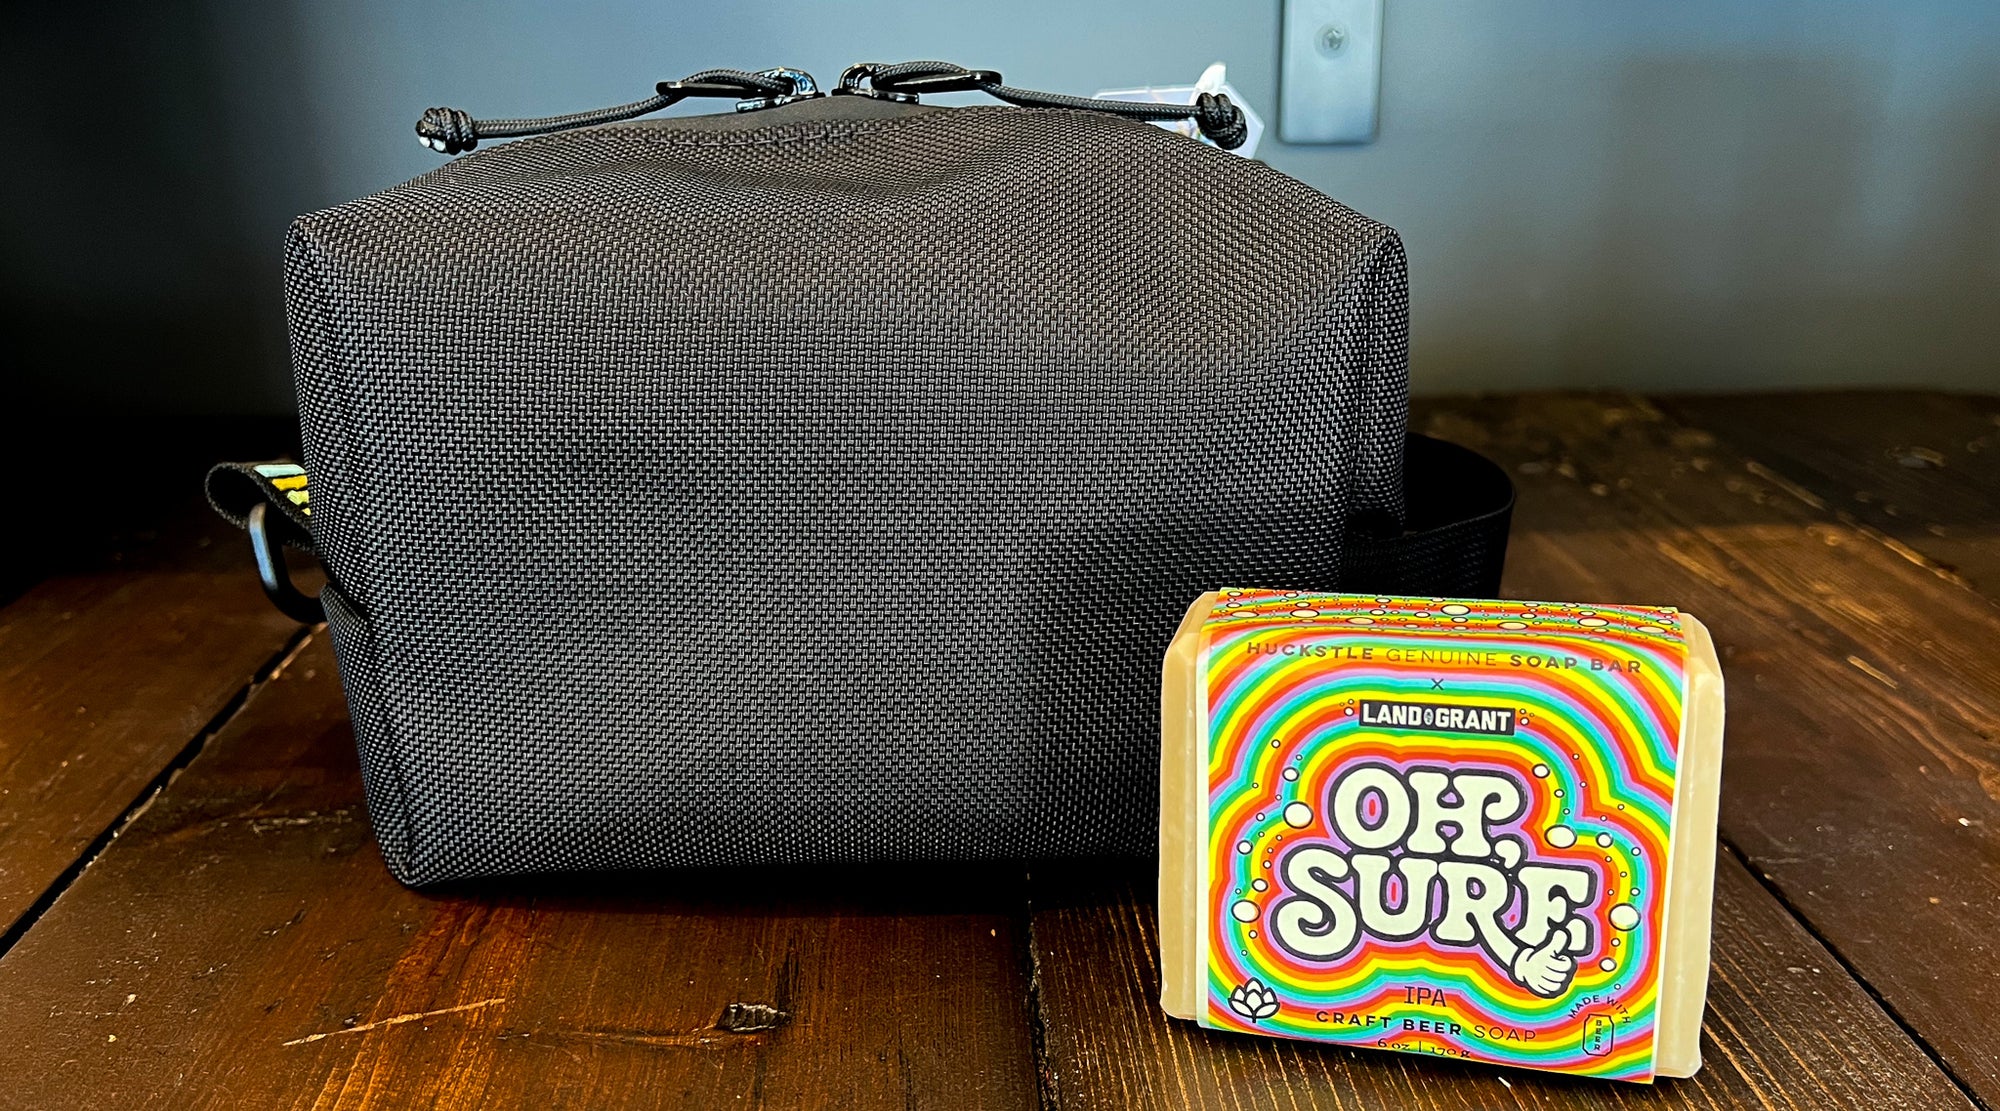 Black Ballistic Nylon Dopp Kit pictured with Beer Soap from Huckstle